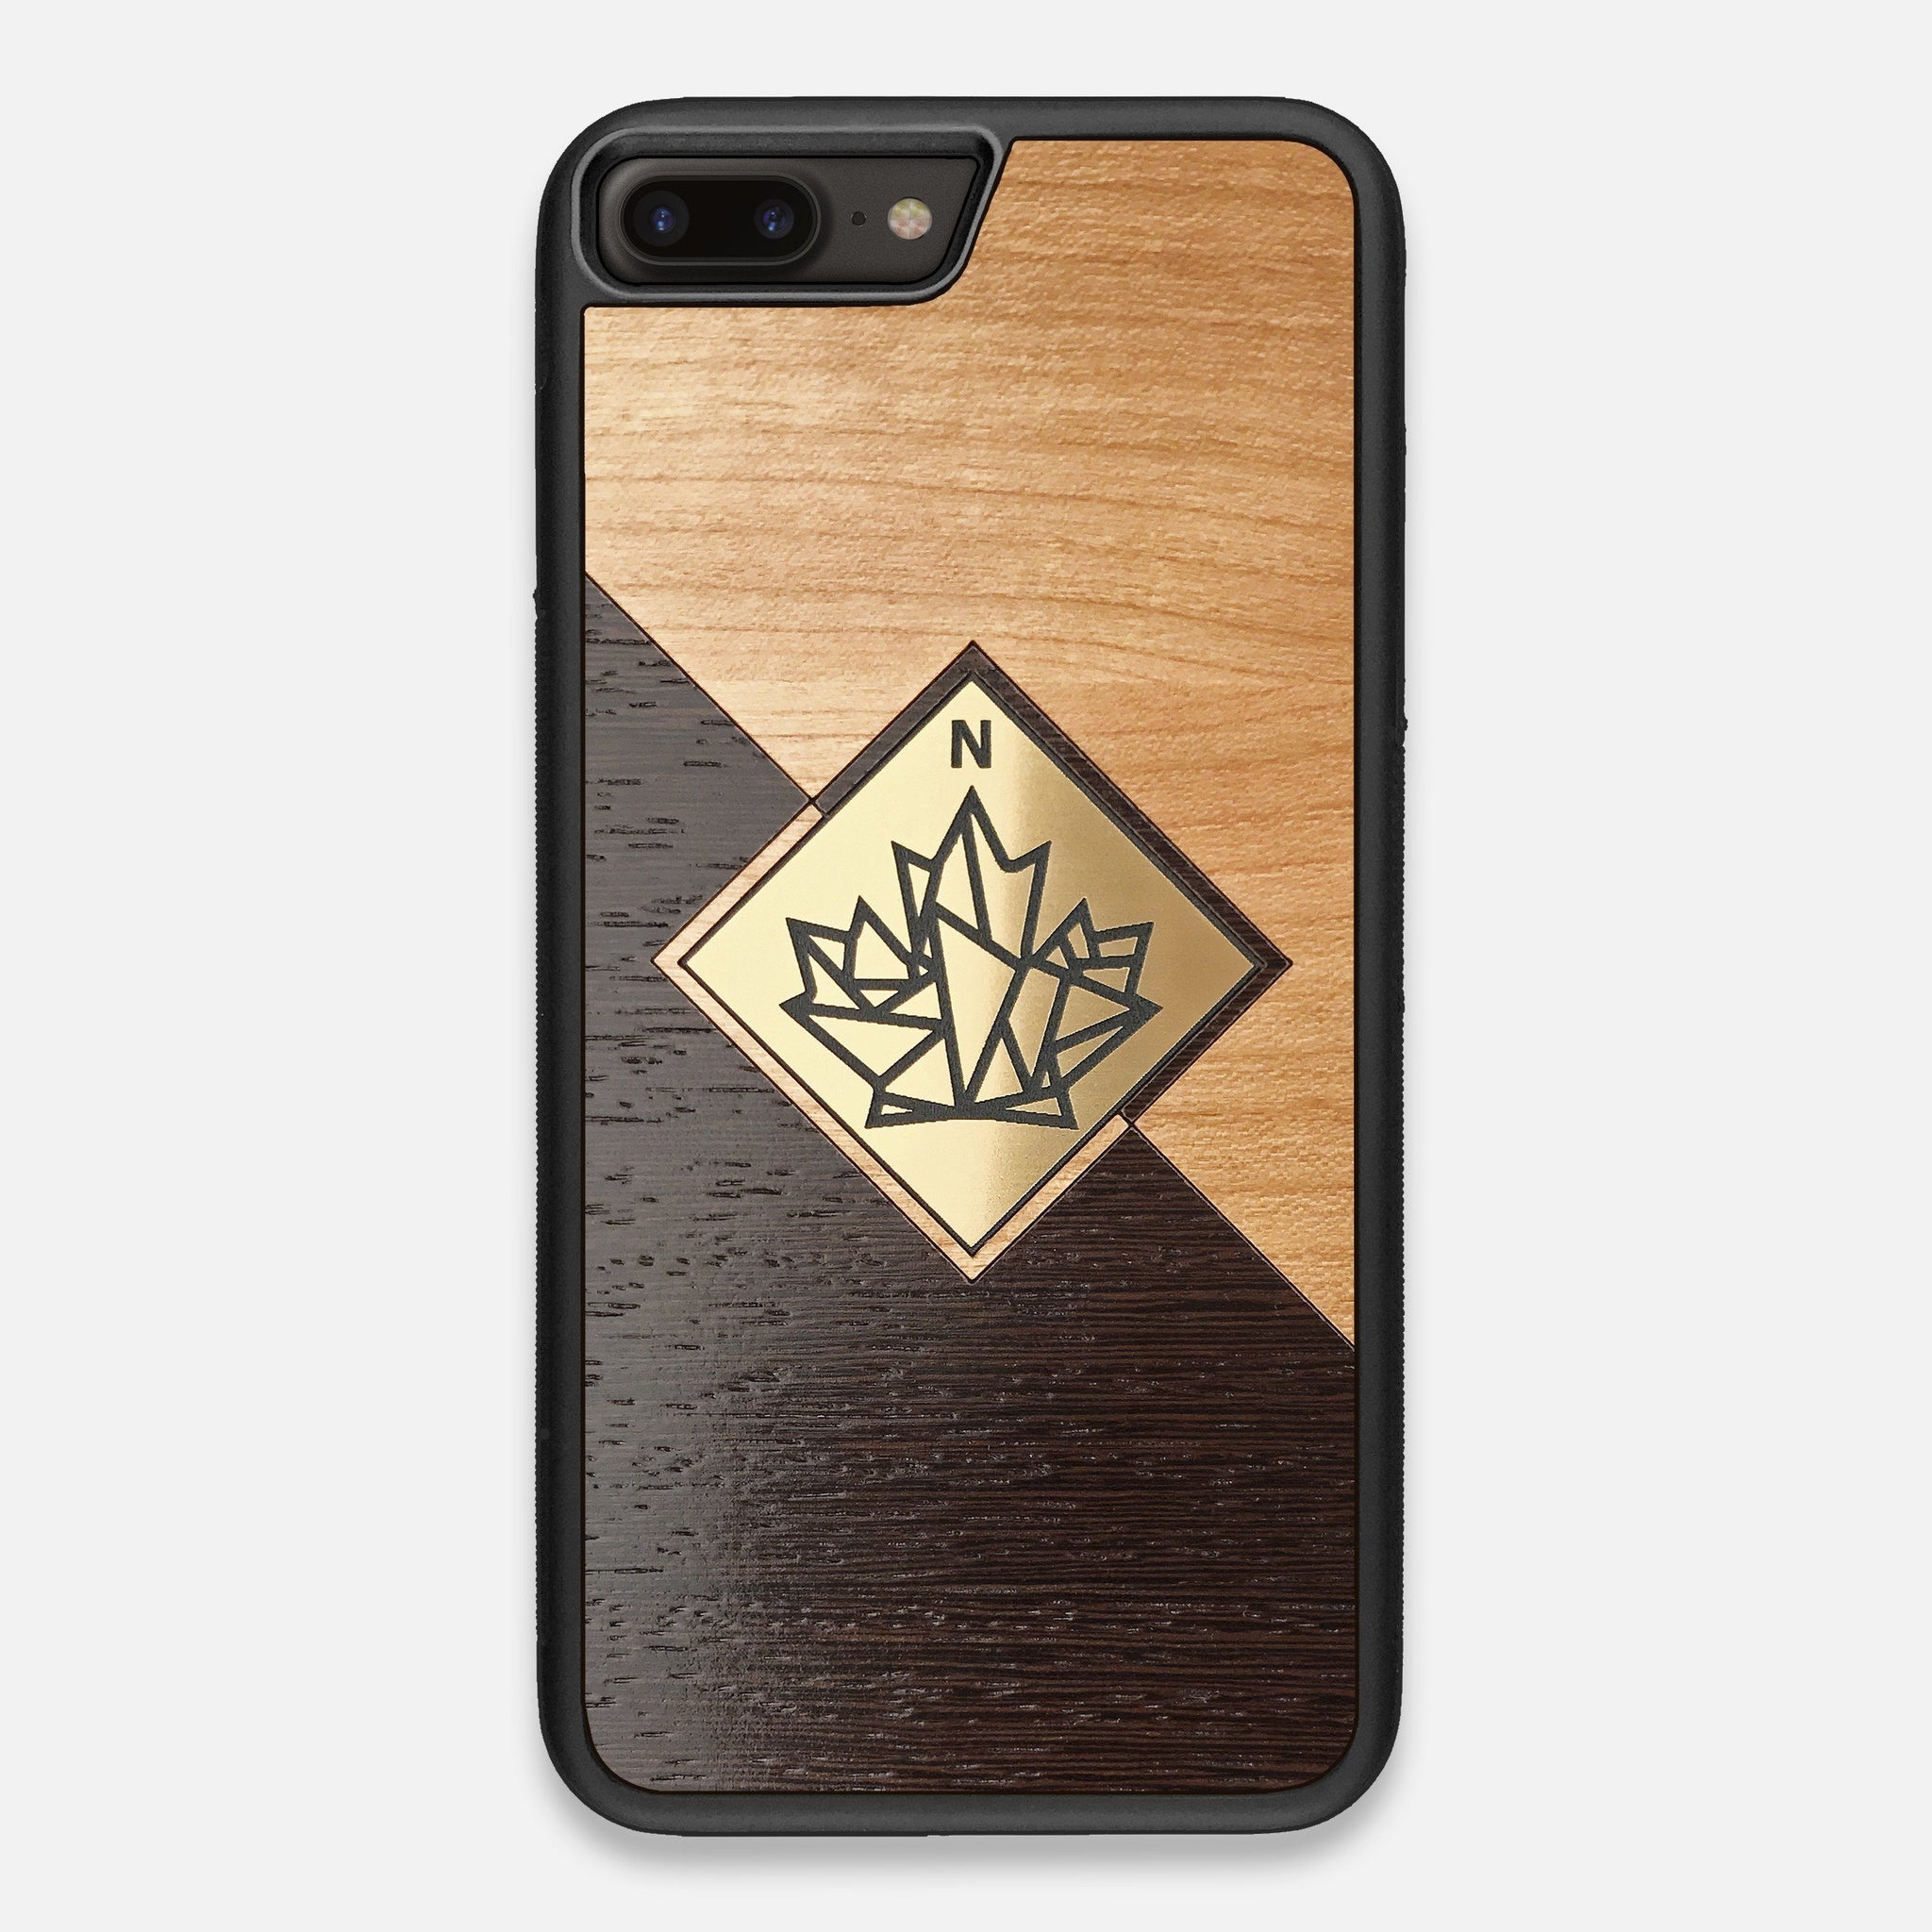 Front view of the True North by Northern Philosophy Cherry & Wenge Wood iPhone 7/8 Plus Case by Keyway Designs